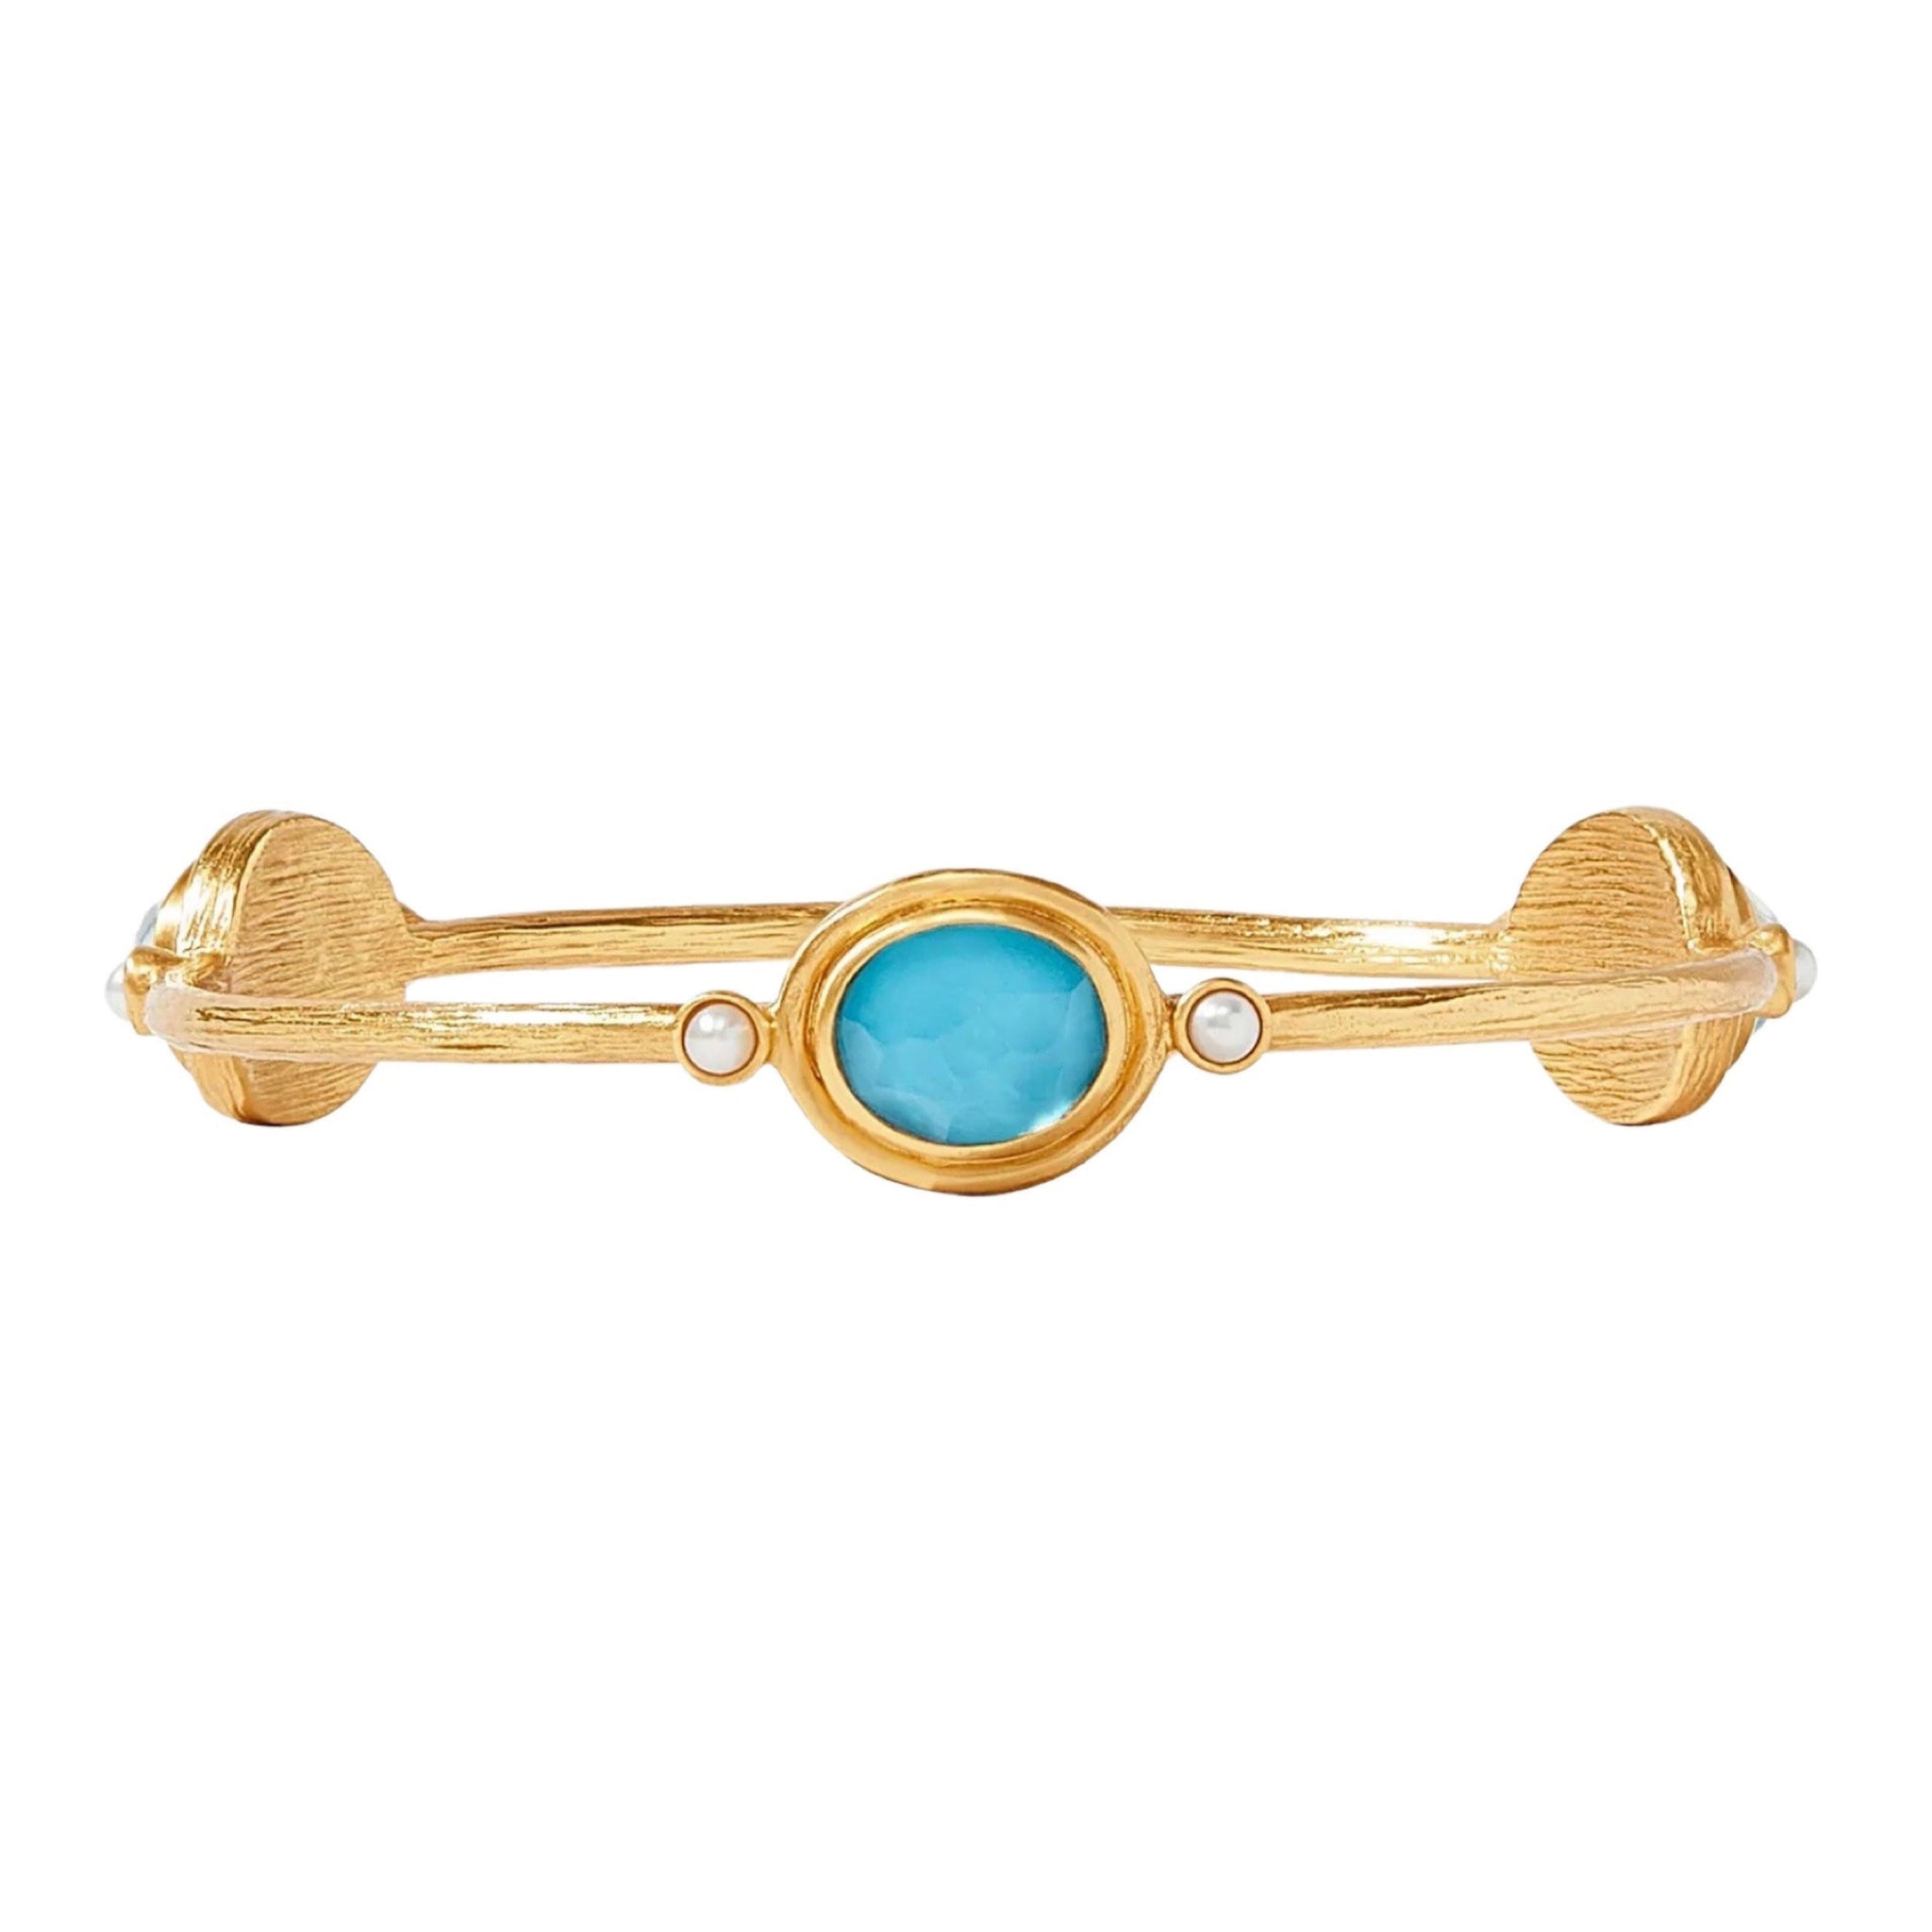 Julie Vos Simone Bangle Bracelet is Available at Shaylula Jewlery & Gifts in Tarrytown, NY and online. Stunning oval gemstone stations in an elegantly scored surround with pearl accents.